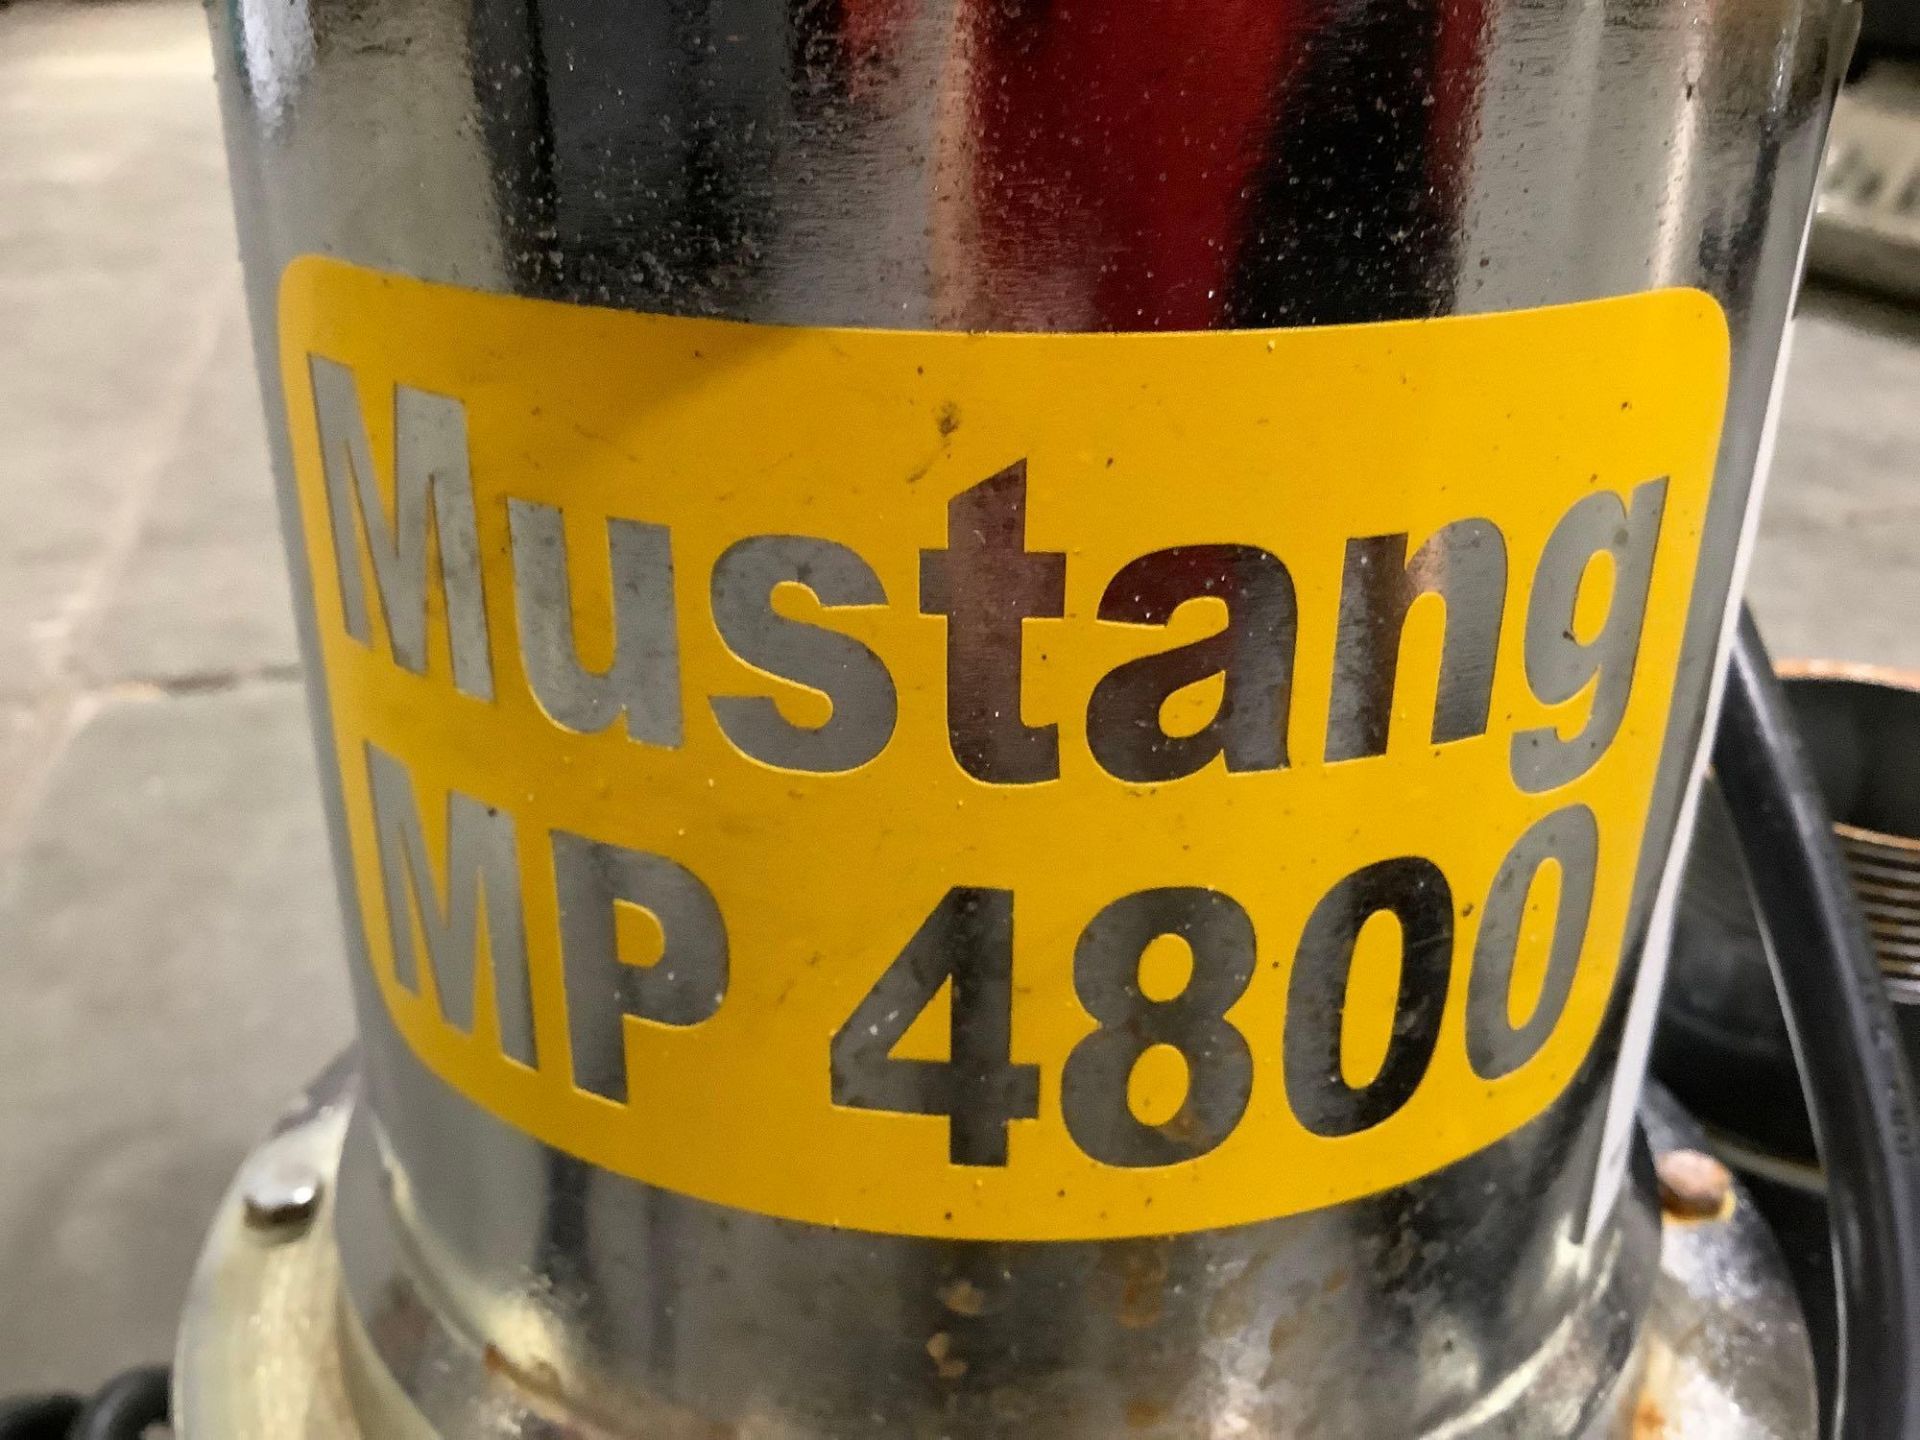 UNUSED SUBMERSIBLE MUSTANG MP4800 PUMP - Image 6 of 6